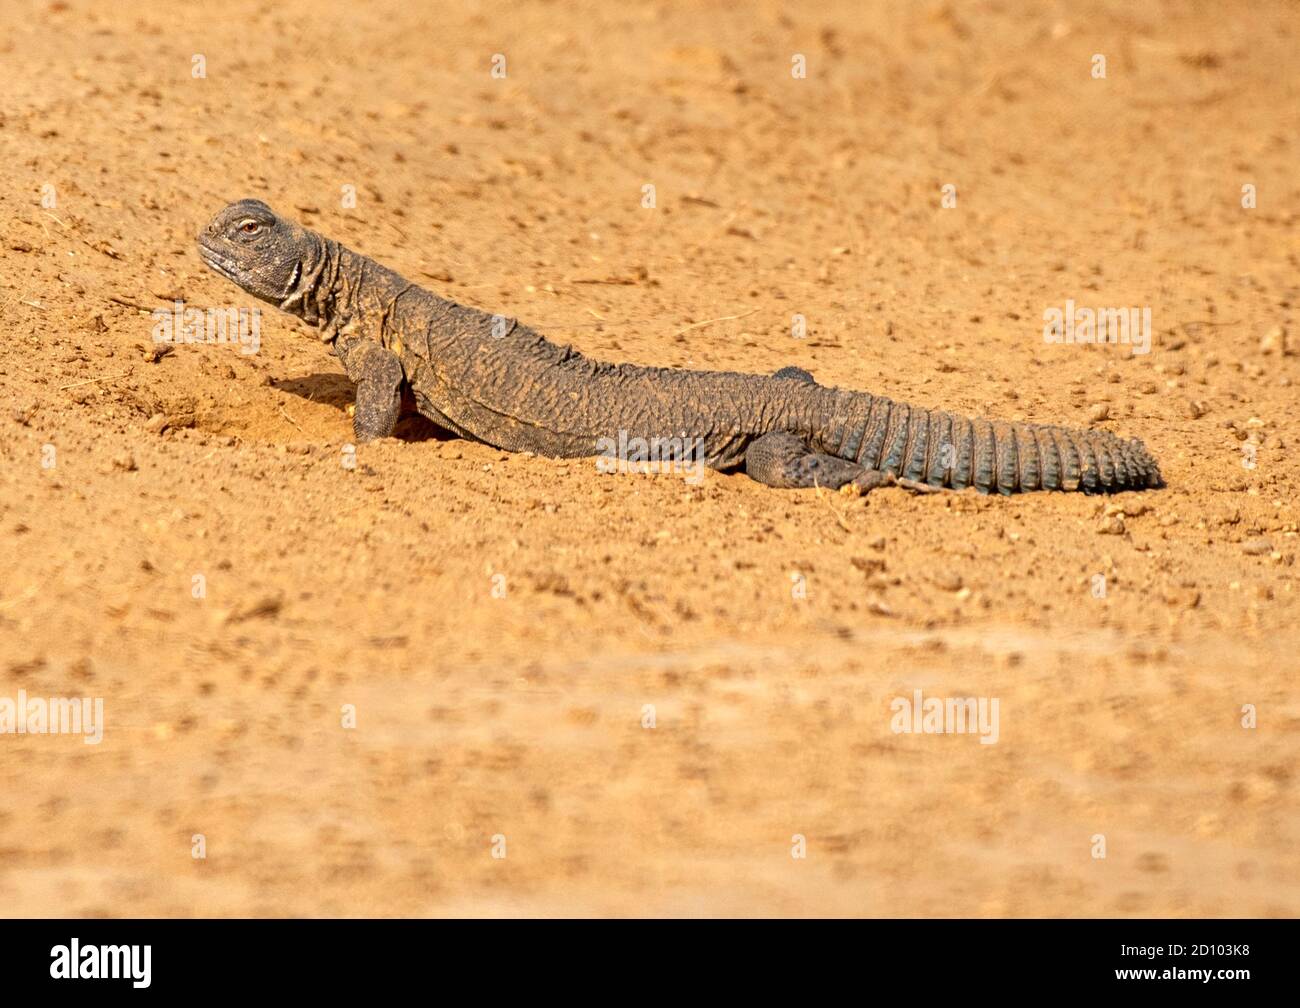 Uromastyx is a genus of African and Asian agamid lizards, the member species of which are commonly called spiny-tailed lizards, uromastyces, mastigure Stock Photo